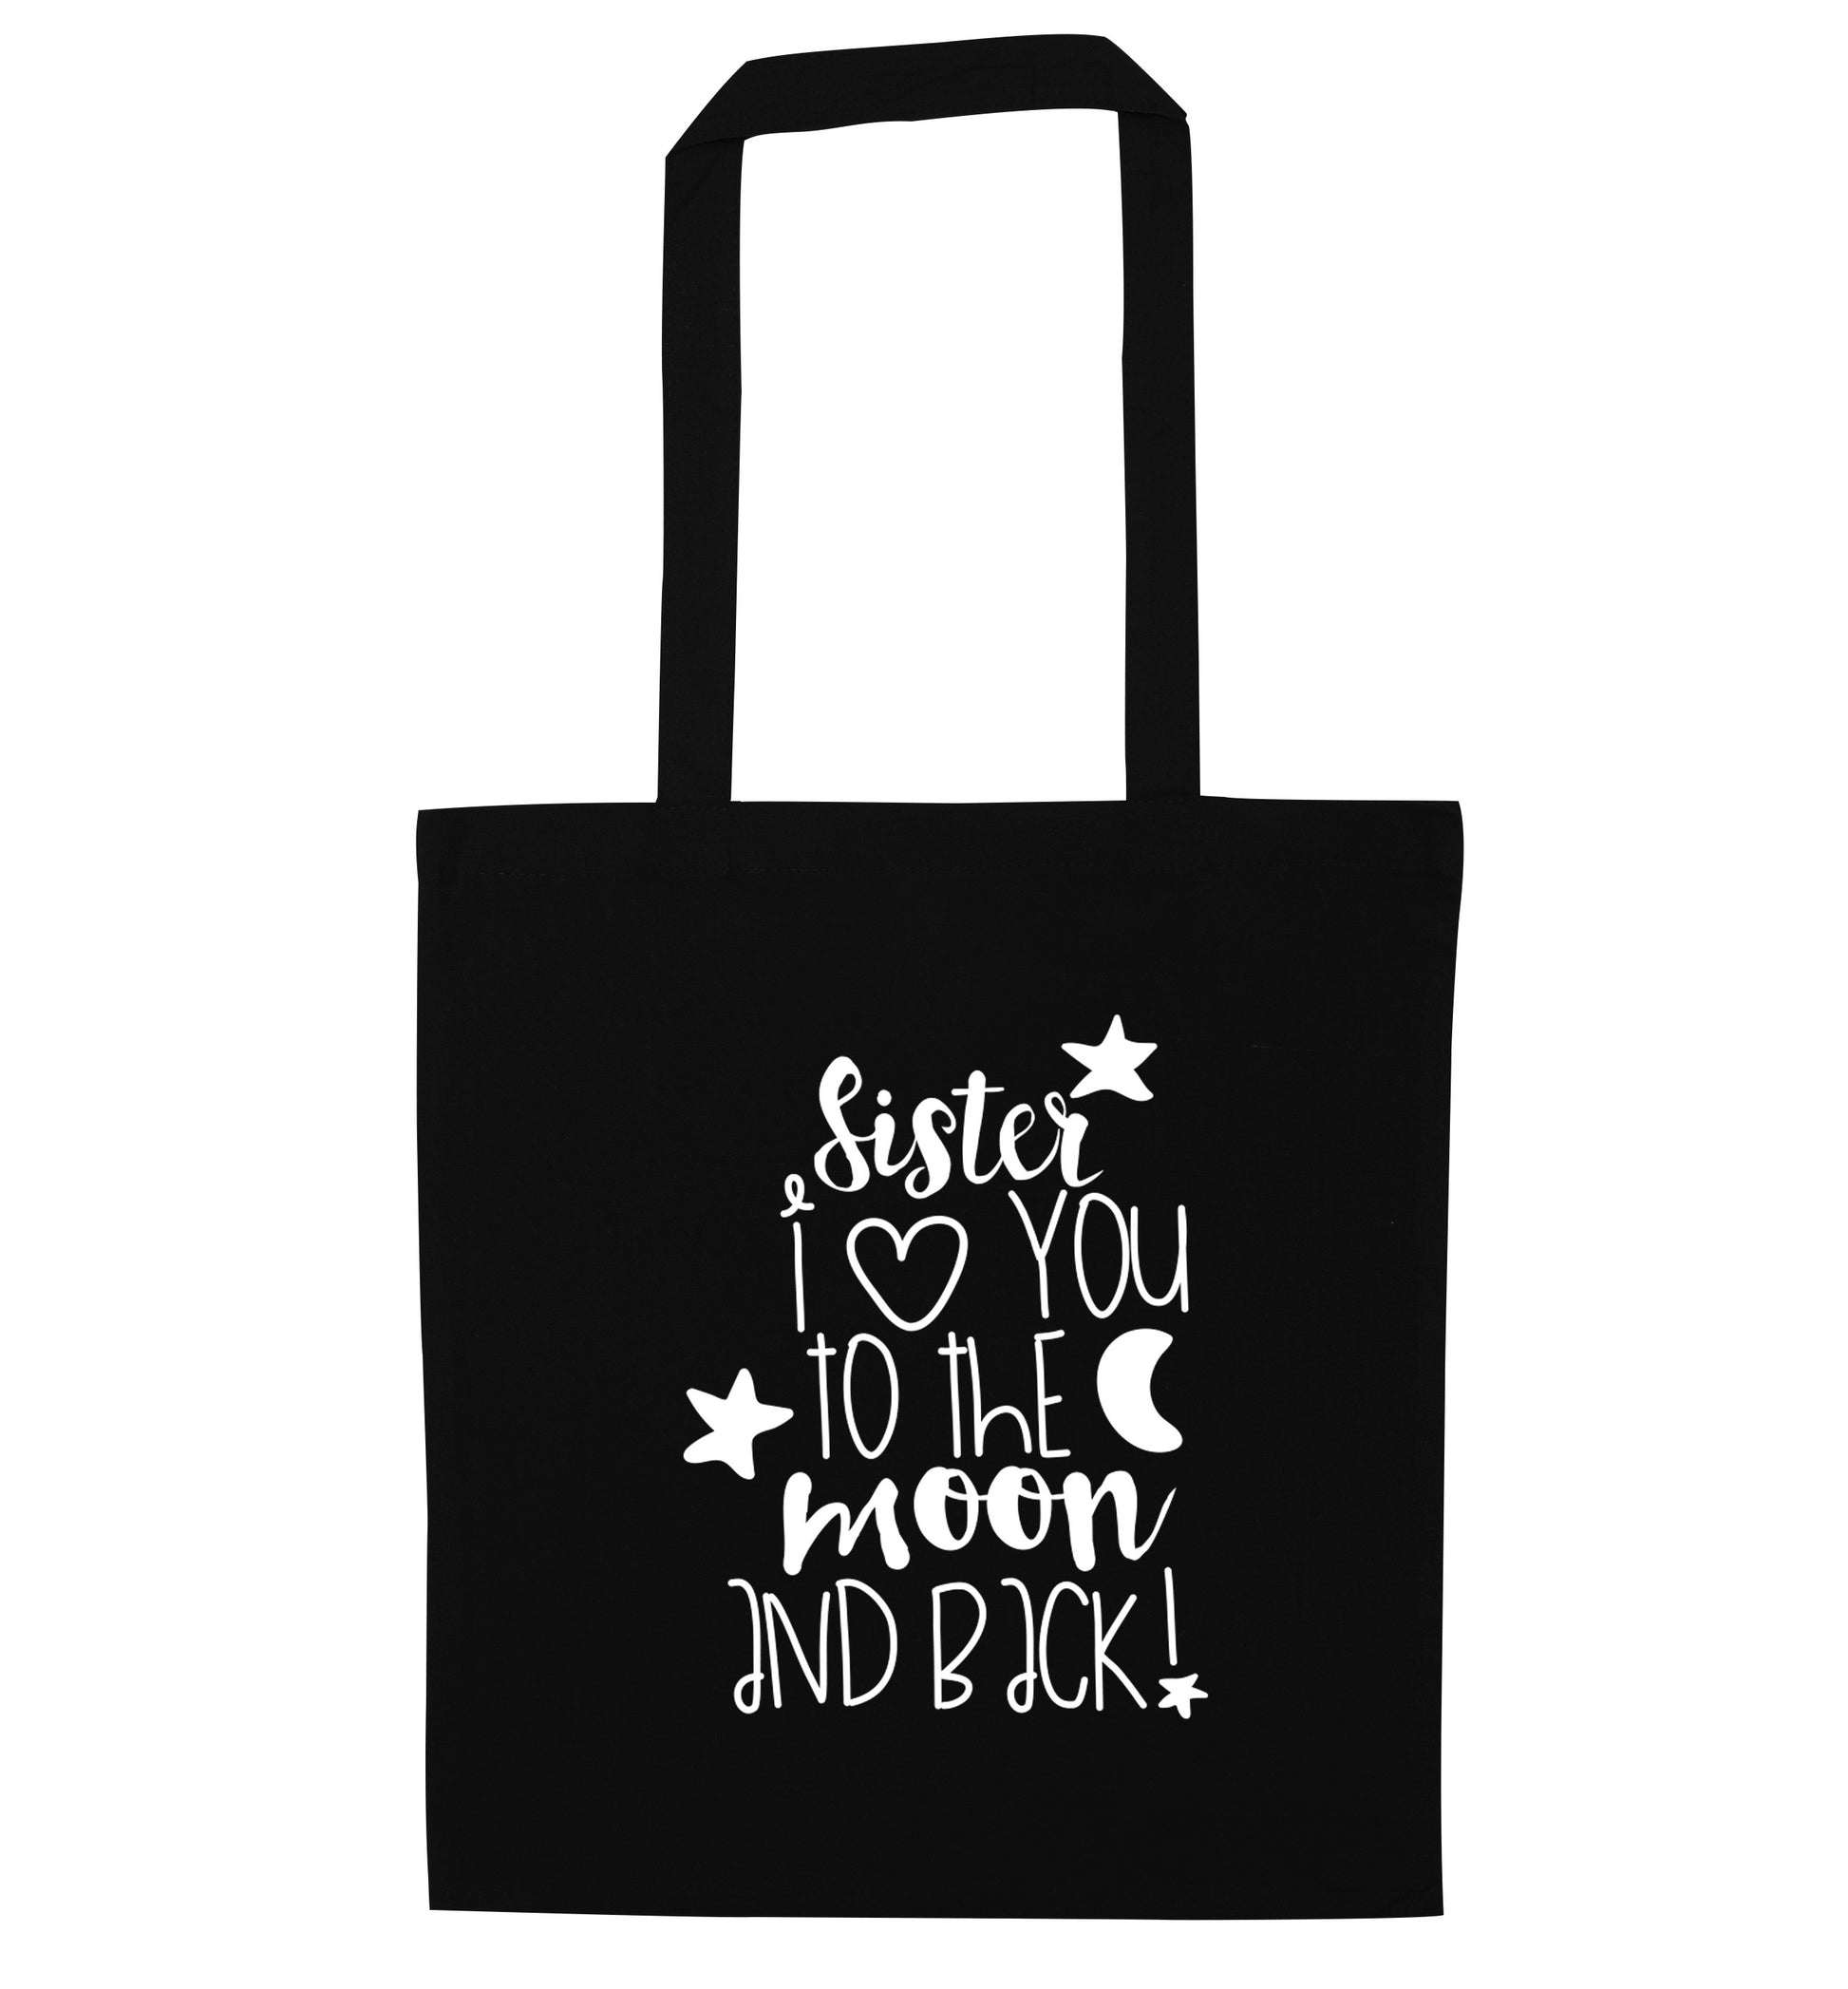 Sister I love you to the moon and back black tote bag